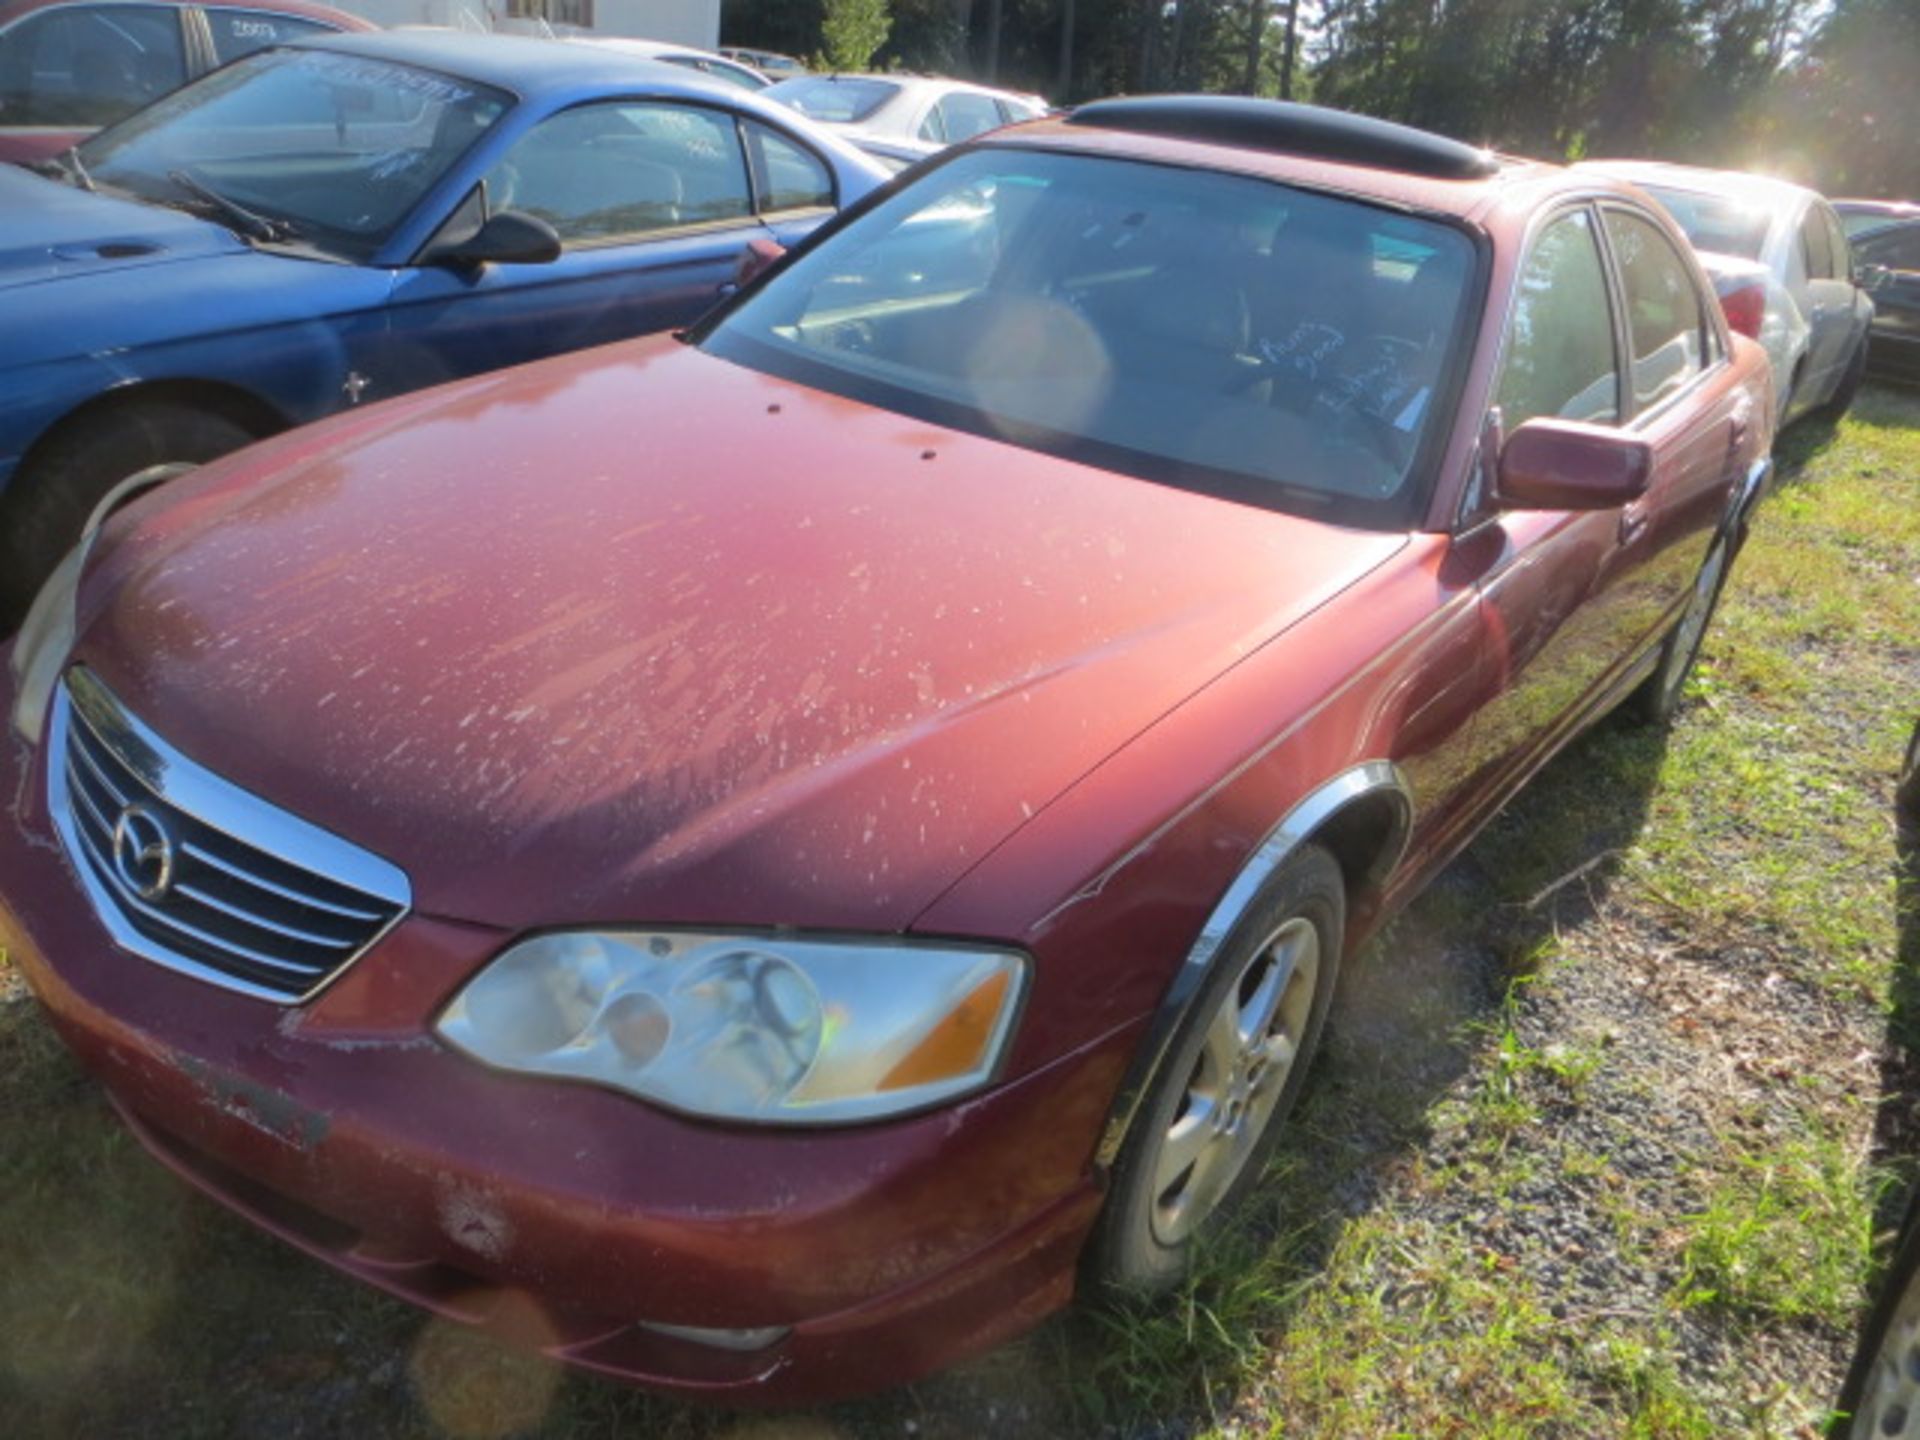 2001 Mazda Millenia-EXHAUST LEAKAGE 166000 MILES,VIN JM11A221211711416, SOLD GOOD TRANSFERABLE TITLE - Image 2 of 3